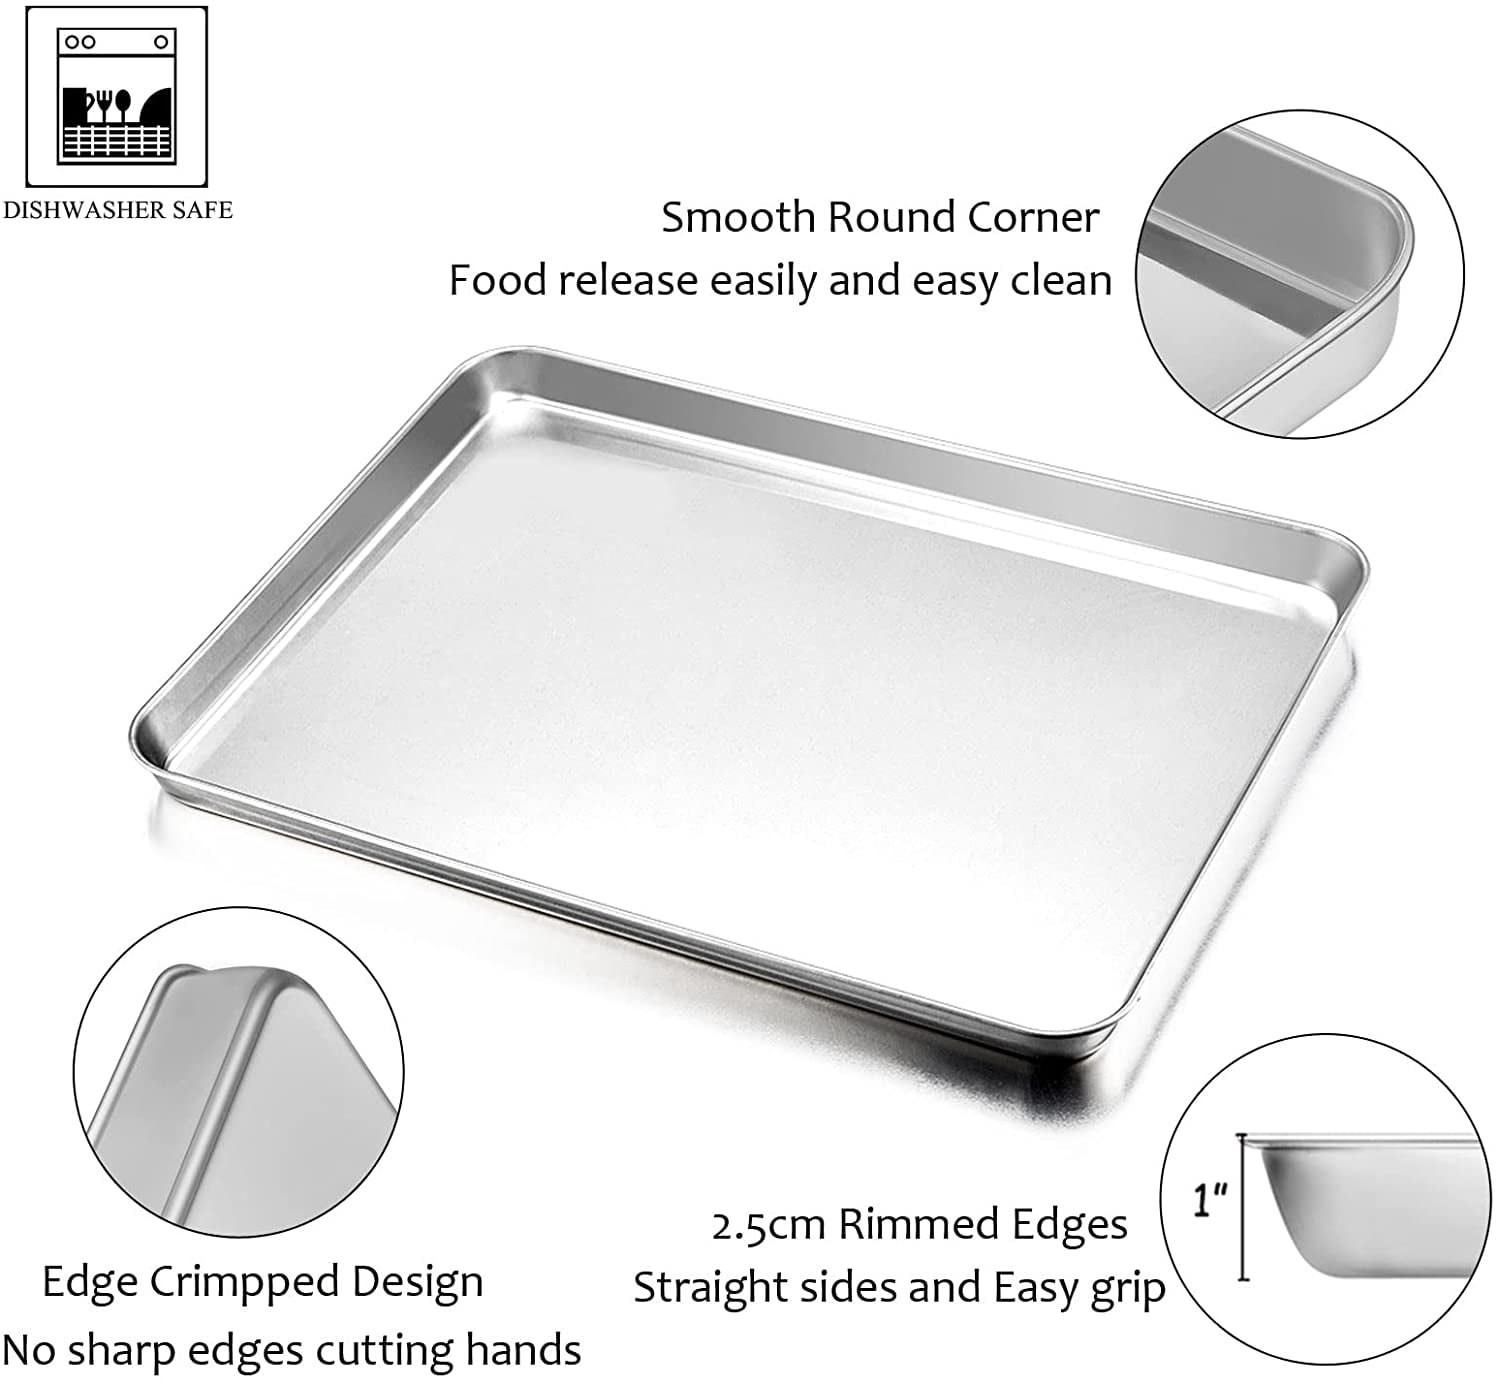  WEZVIX Large Baking Sheet Stainless Steel Cookie Sheet Half Sheet  Oven Tray Baking Pan Rectangle Size:19.6 x 13.5 x 1.2 inches, Rust Free &  Less Stick, Easy Clean & Dishwasher Safe